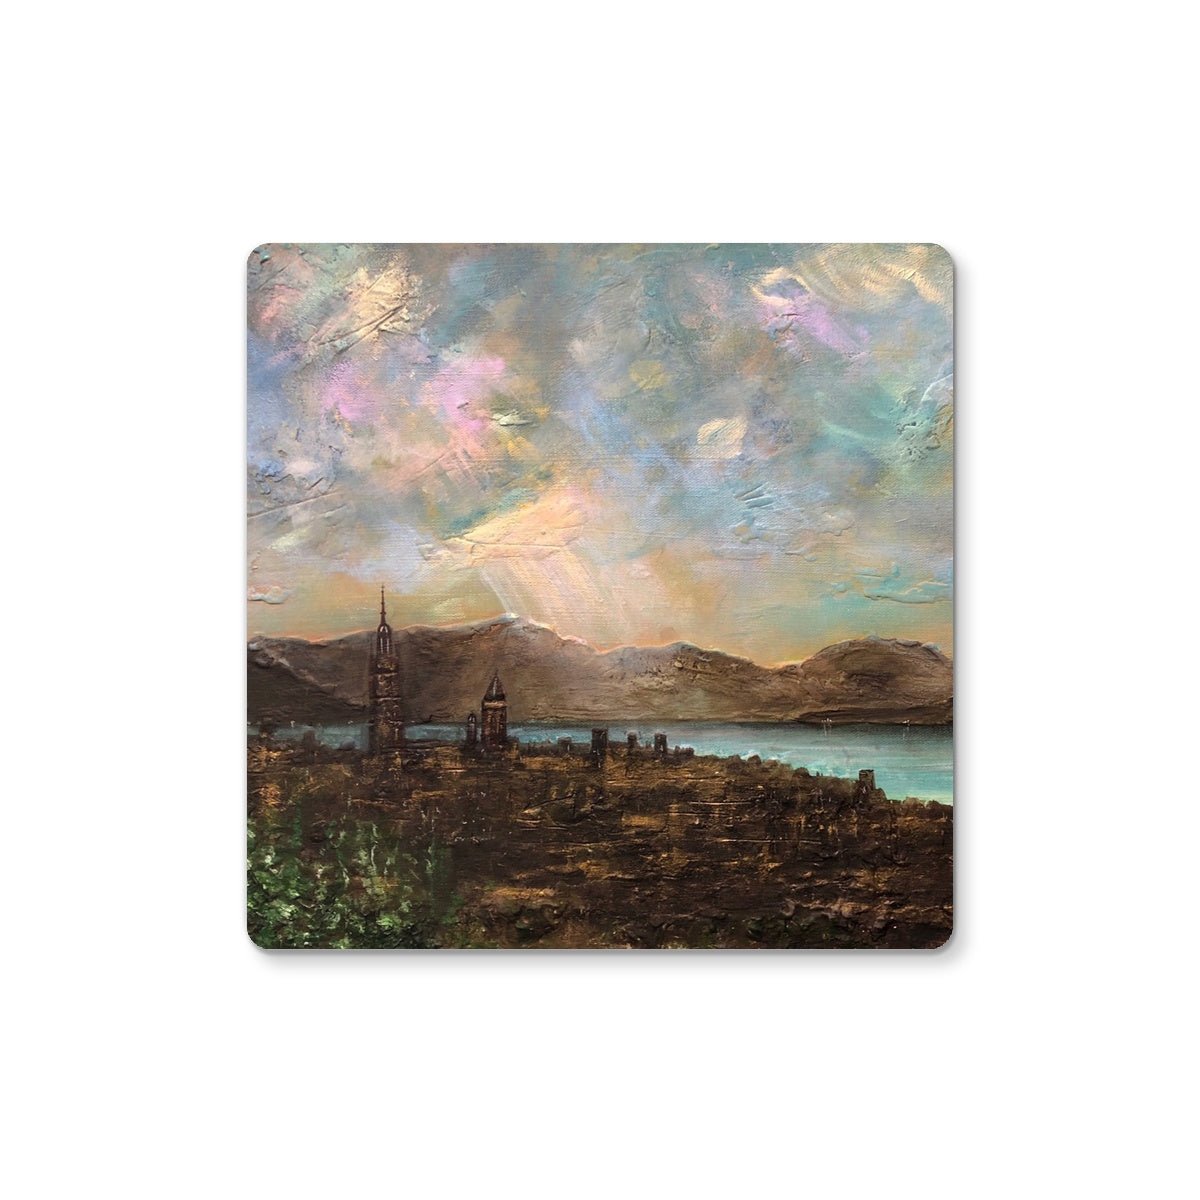 Angels Fingers Over Greenock Art Gifts Coaster-Coasters-River Clyde Art Gallery-Single Coaster-Paintings, Prints, Homeware, Art Gifts From Scotland By Scottish Artist Kevin Hunter